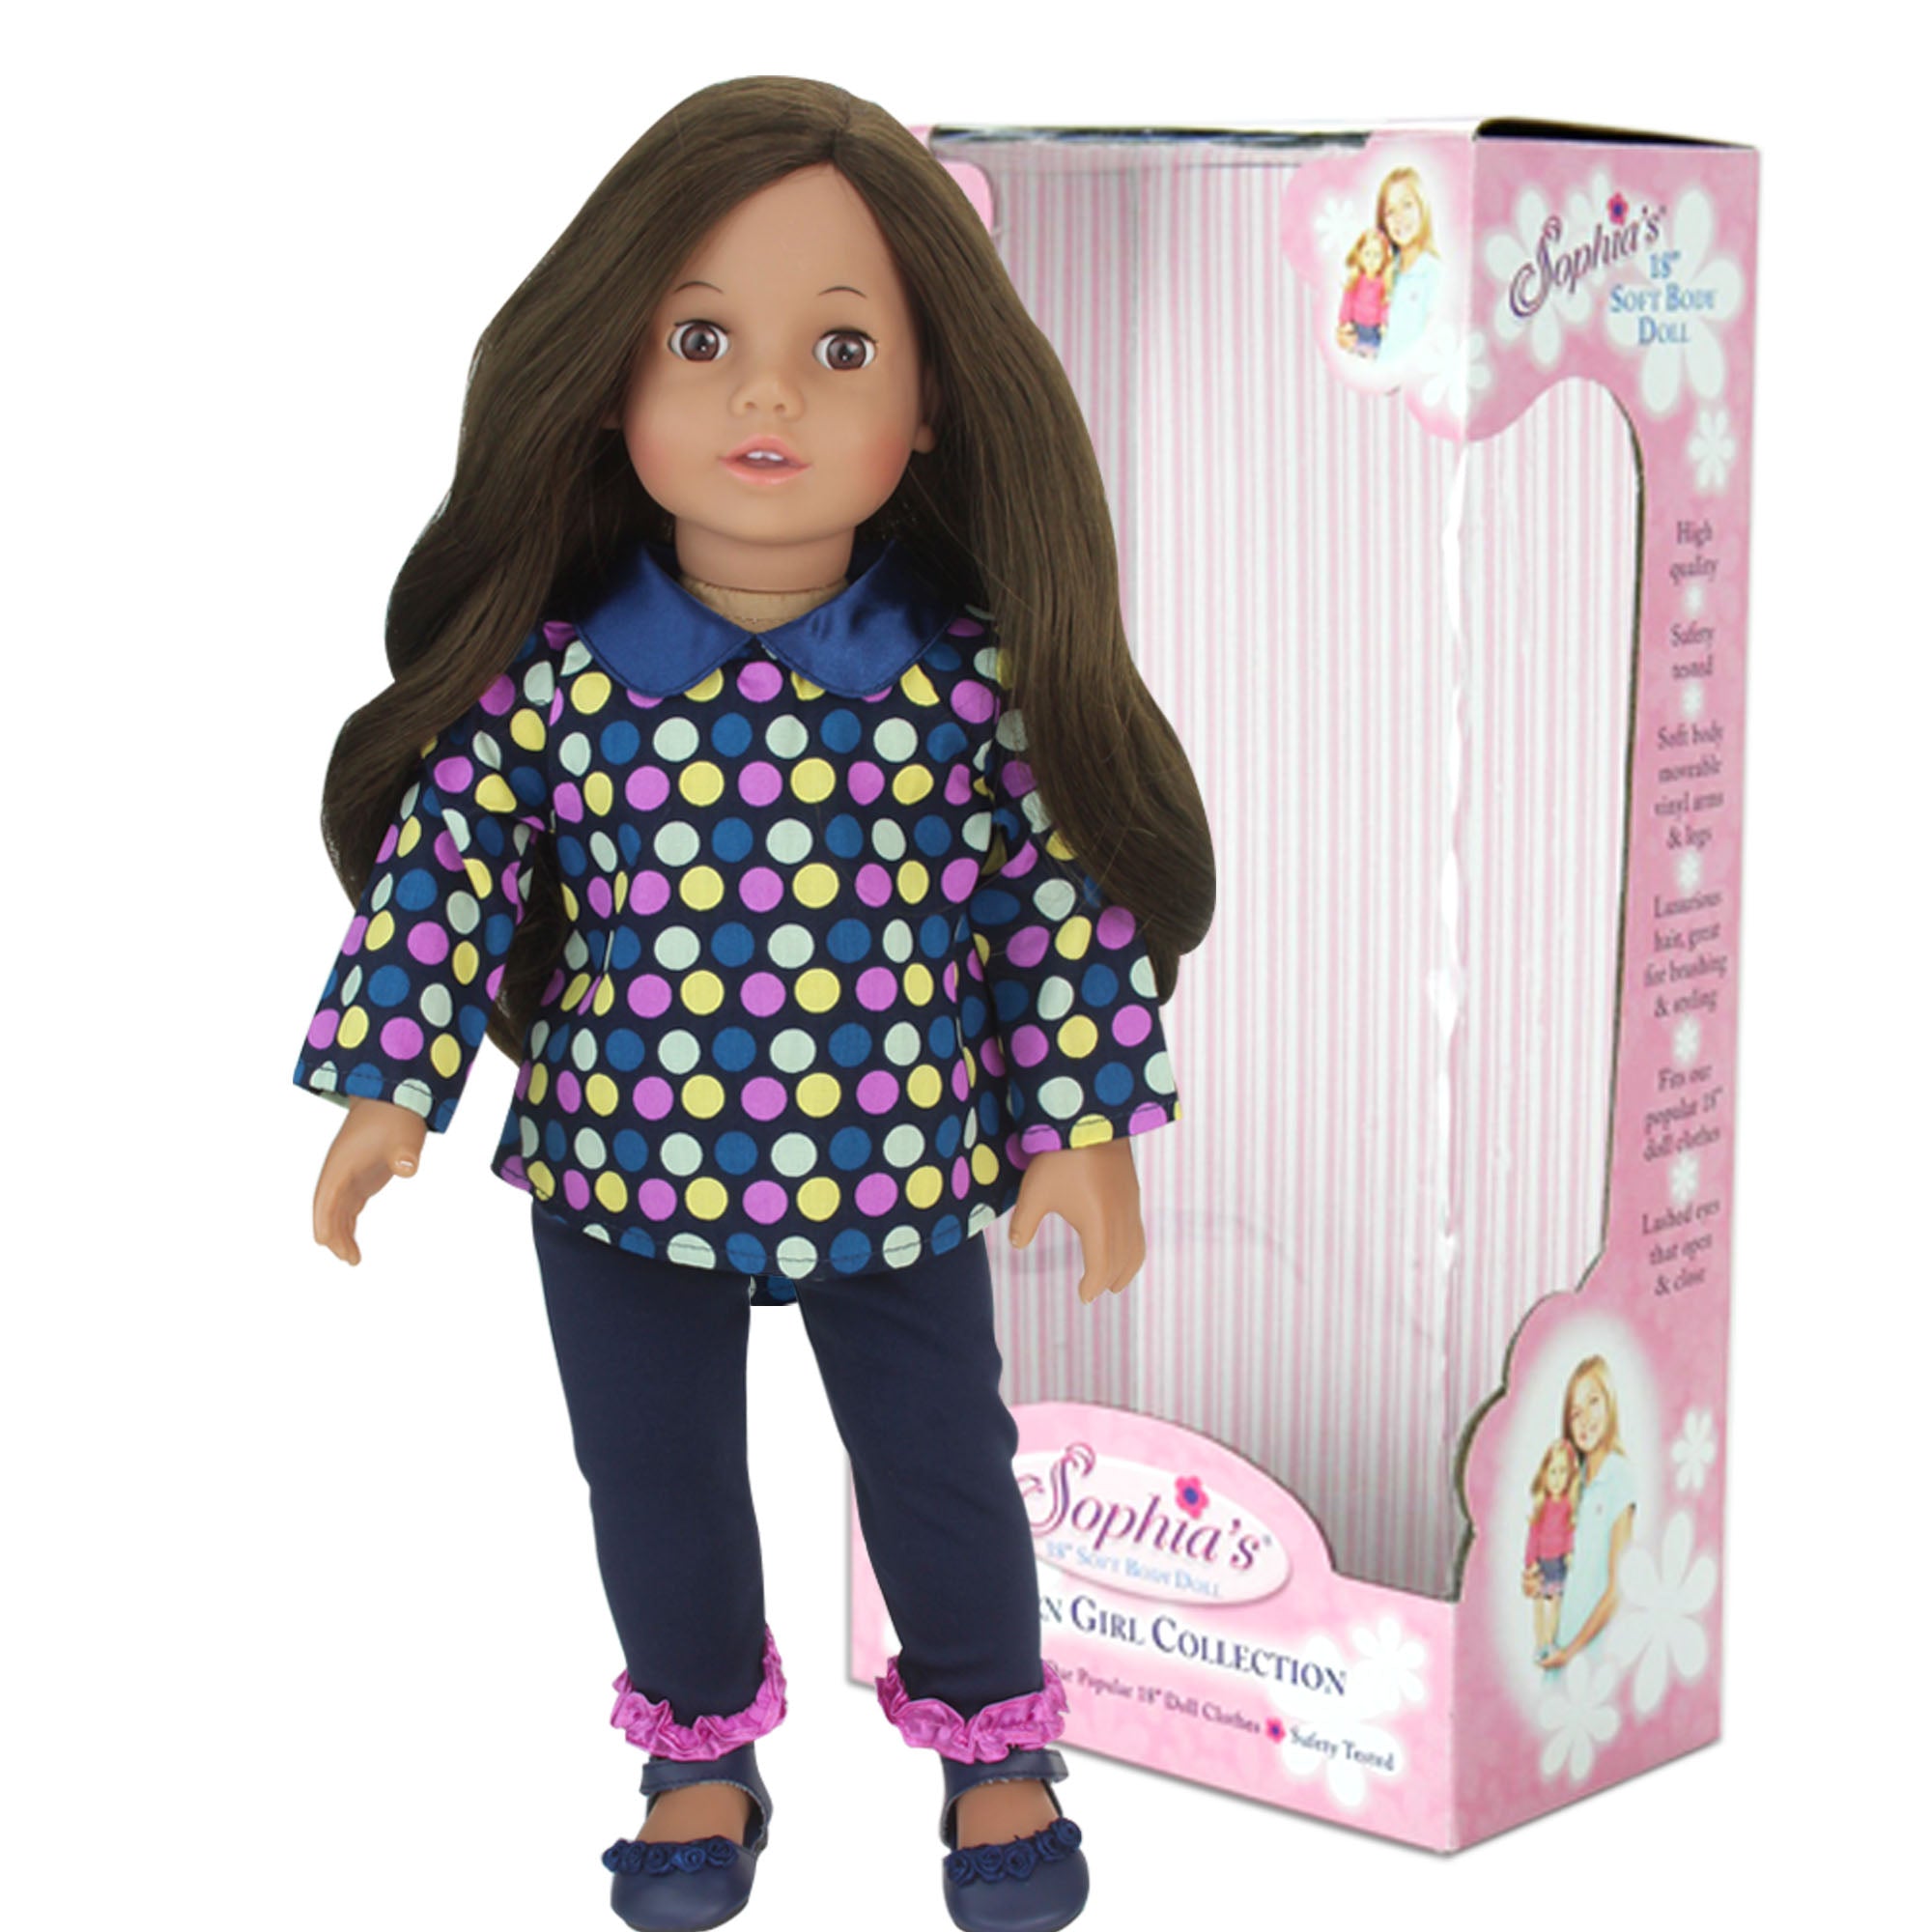 Sophia's Posable 18'' Soft Bodied Vinyl Doll "Catherine" with Brunette Hair and Brown Eyes in a Display Box, Light Skin Tone